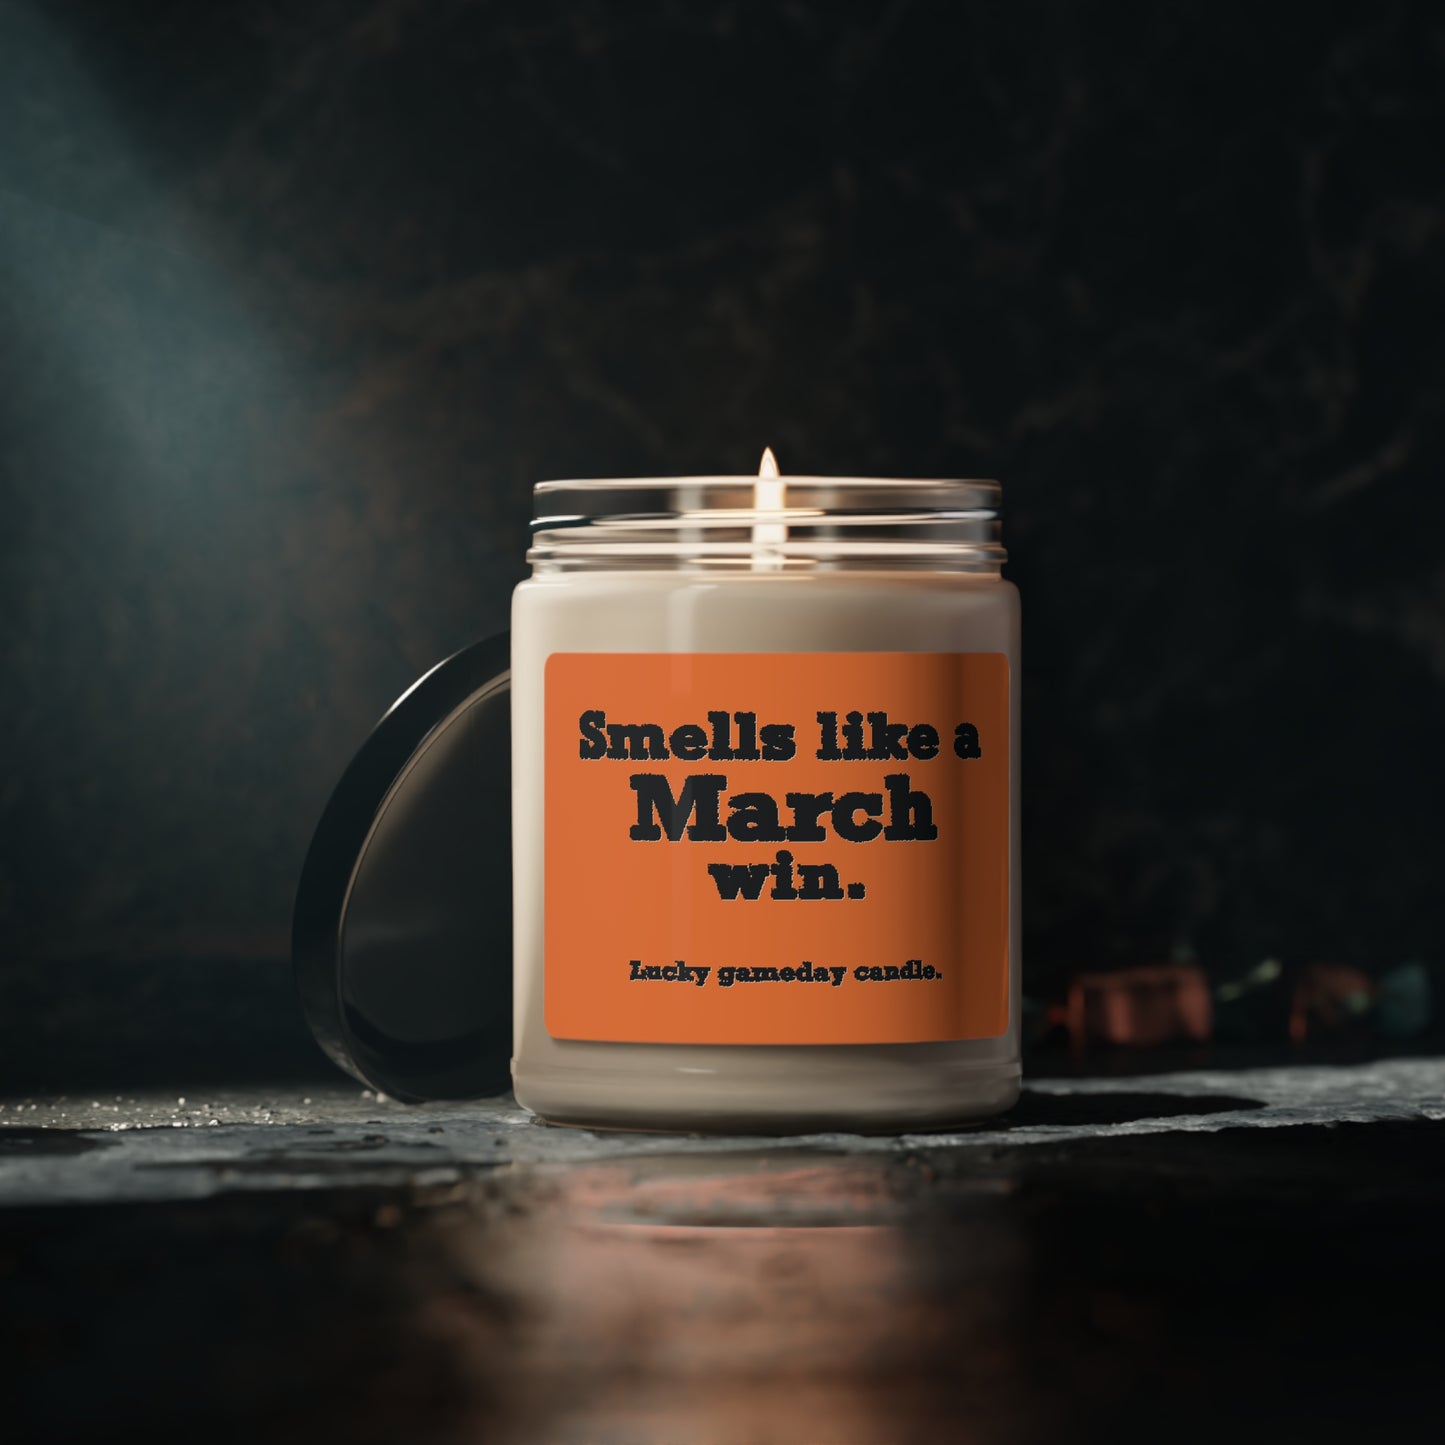 Oklahoma State - "Smells Like a March Win" Scented Candle